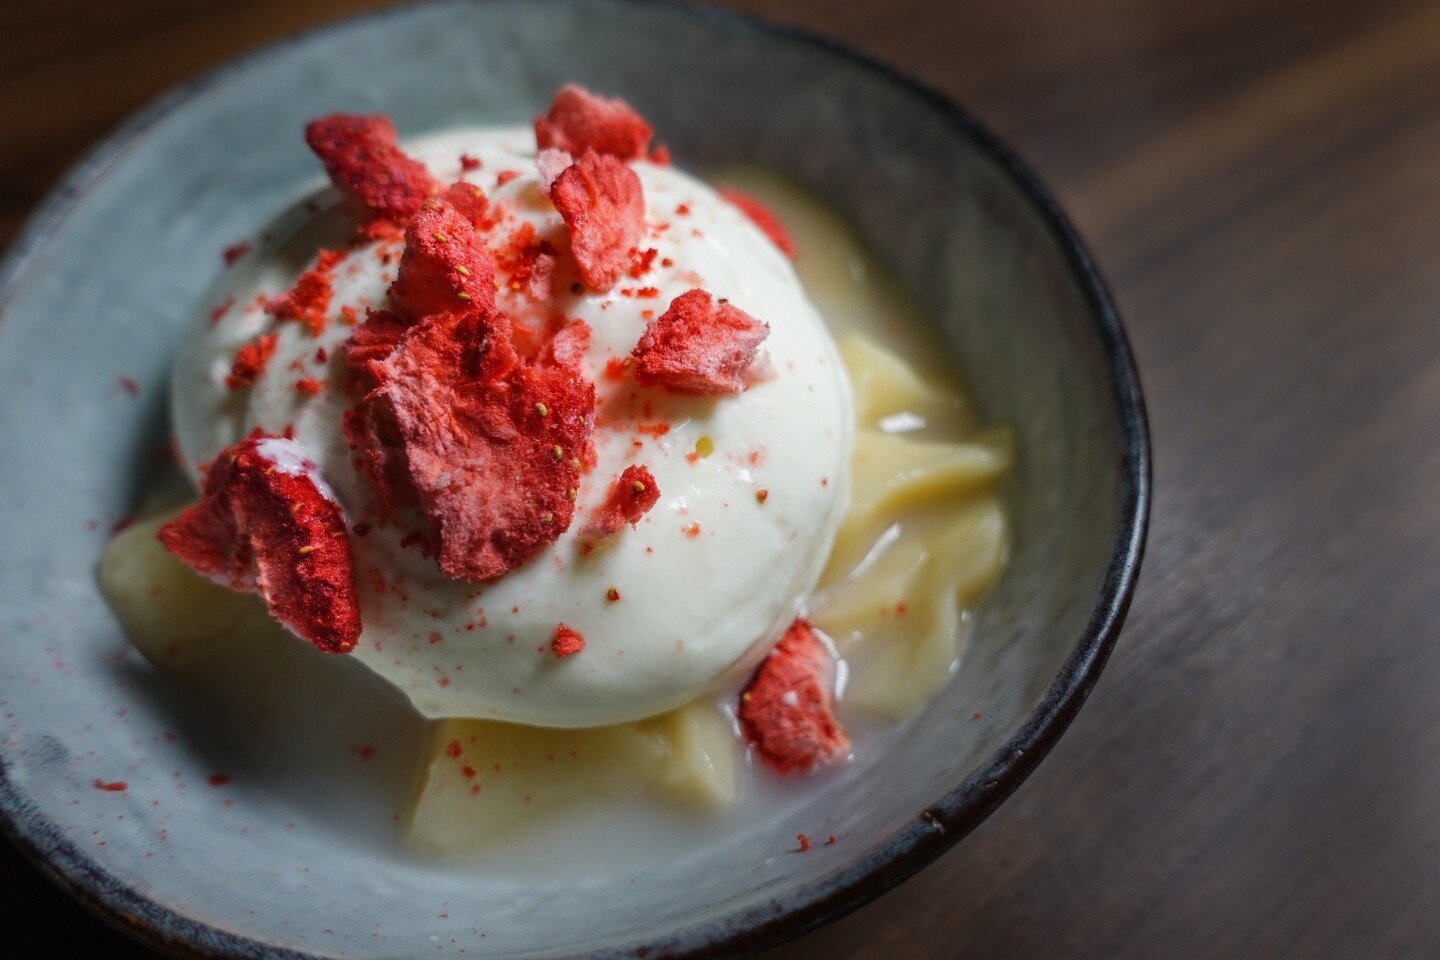 Enjoy the smooth and creamy texture of Makgeolli and the refreshing crunch of dried strawberries in sweet cream. 🍓 Call it a combo you never knew you needed!⁠
⁠
Make your reservations at KOAL and we'll meat 🥩 you there! ⁠